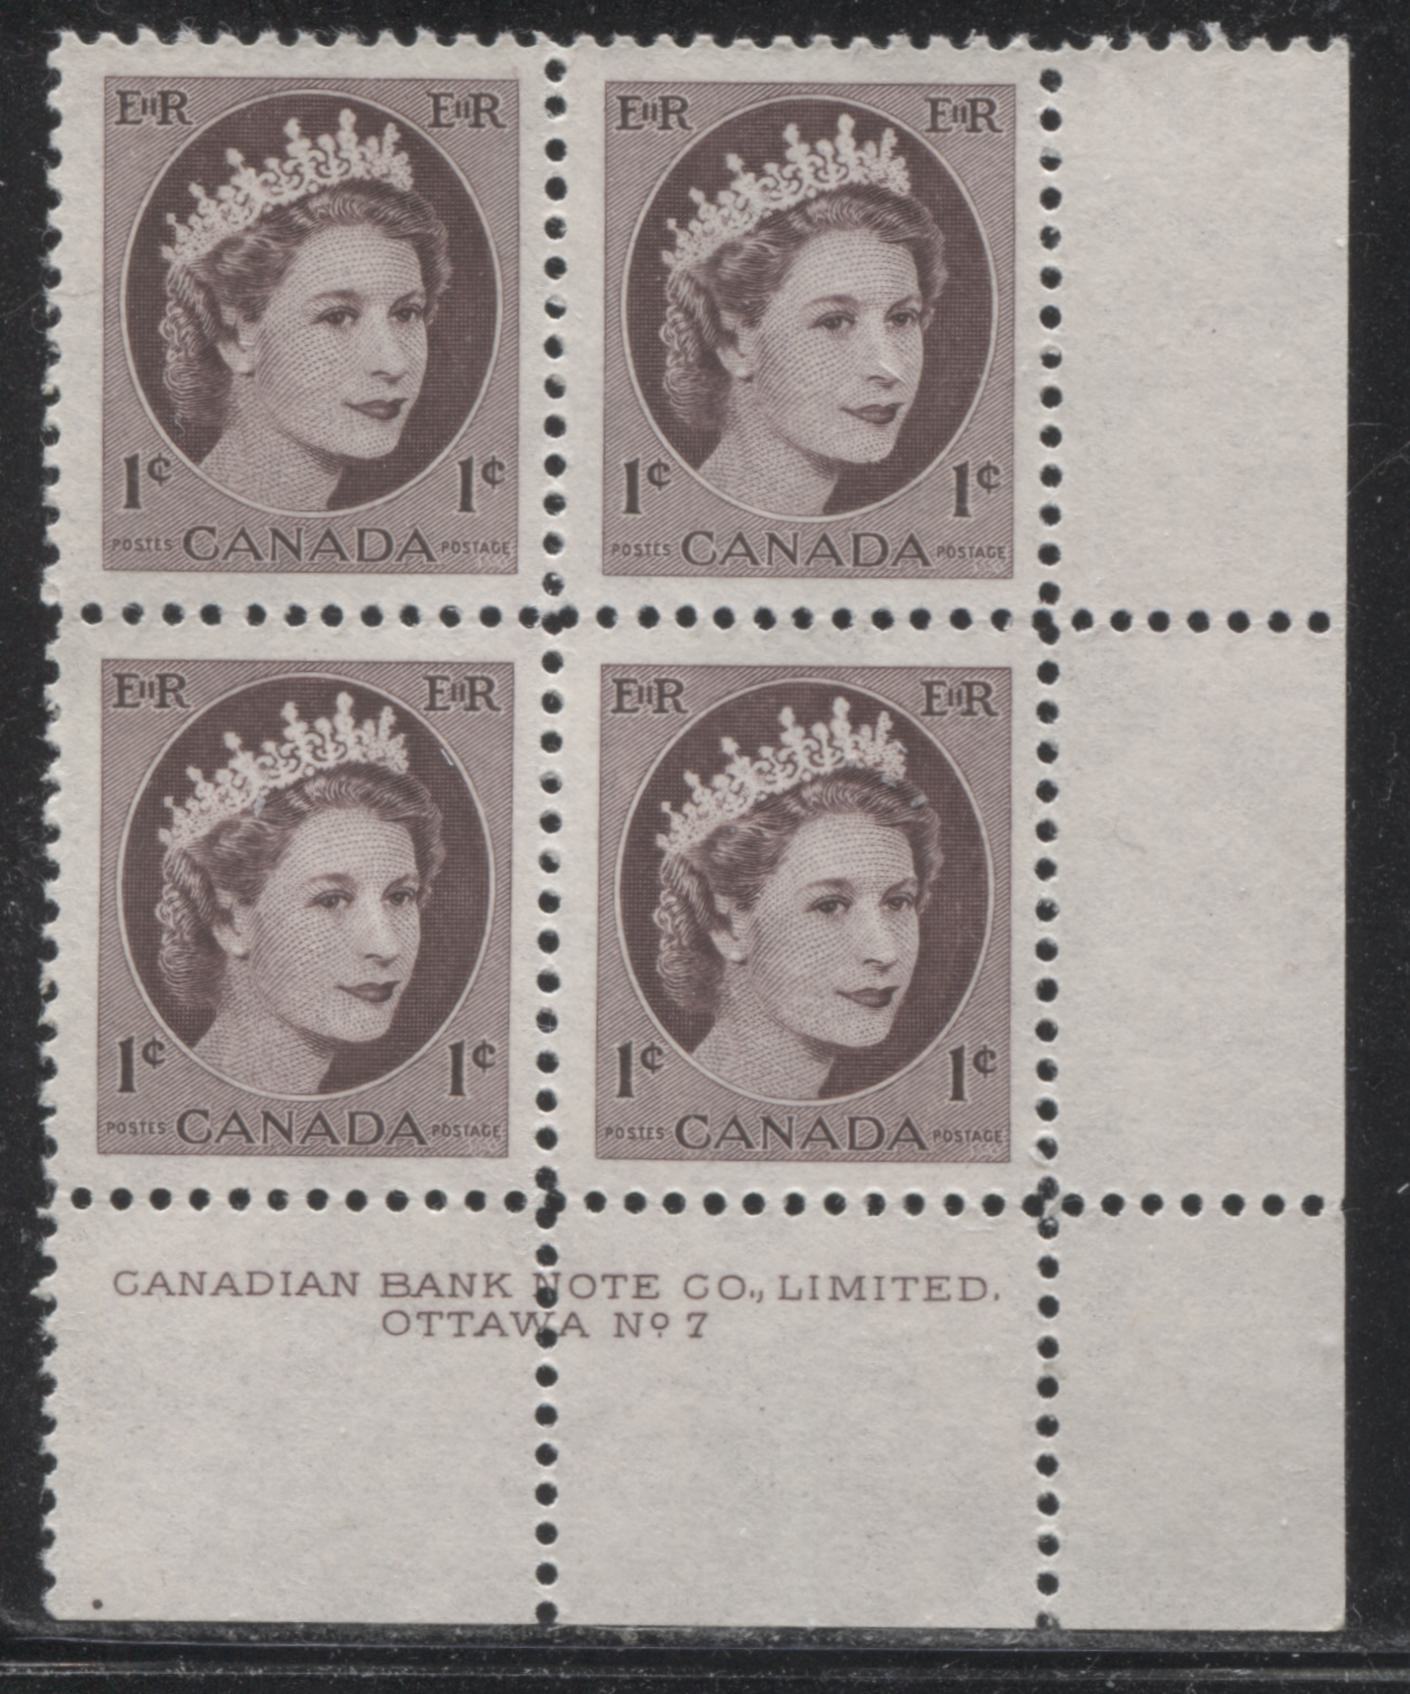 Canada #337 1c Deep Chocolate Queen Elizabeth II, 1954-1962 Wilding Issue, Lower Right Plate 7 Block of 4, Perf. 12, Bright DF Gr Smooth Vertical Wove, Streaky Satin Gum, VFNH Brixton Chrome 